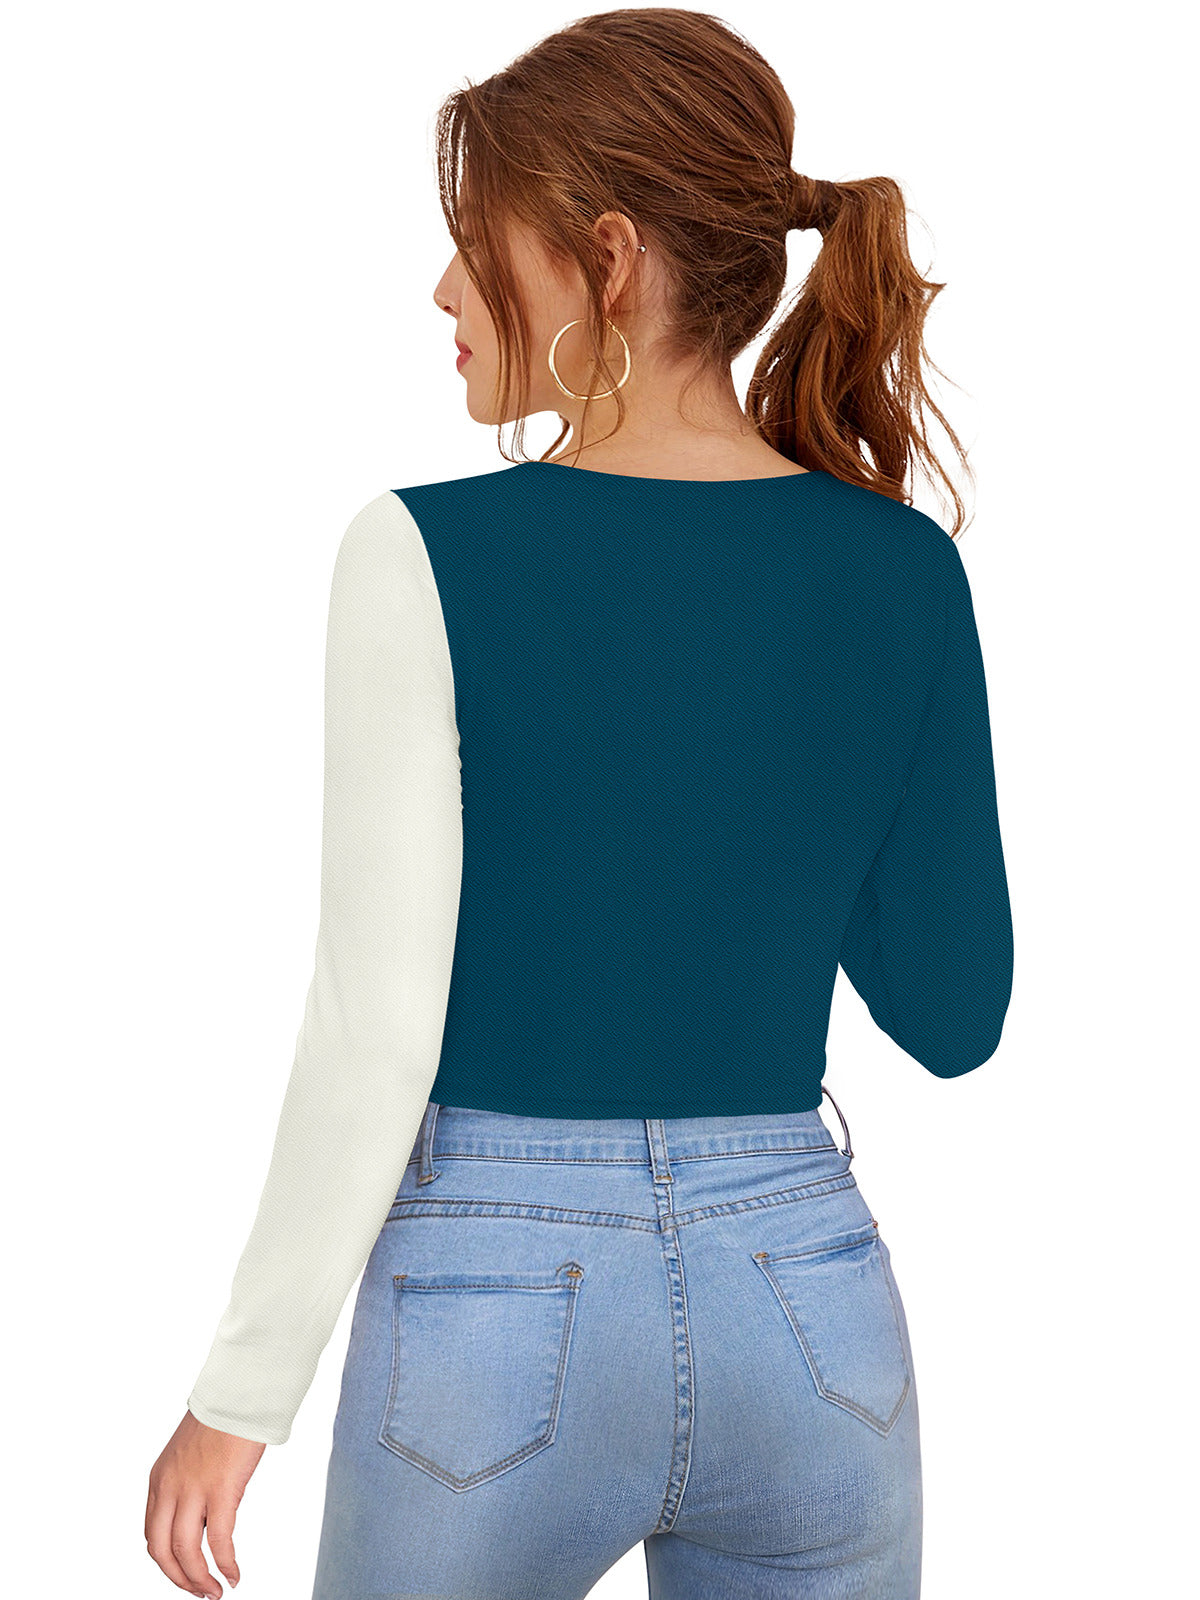 Odette Teal Polyester Solid Top For Women